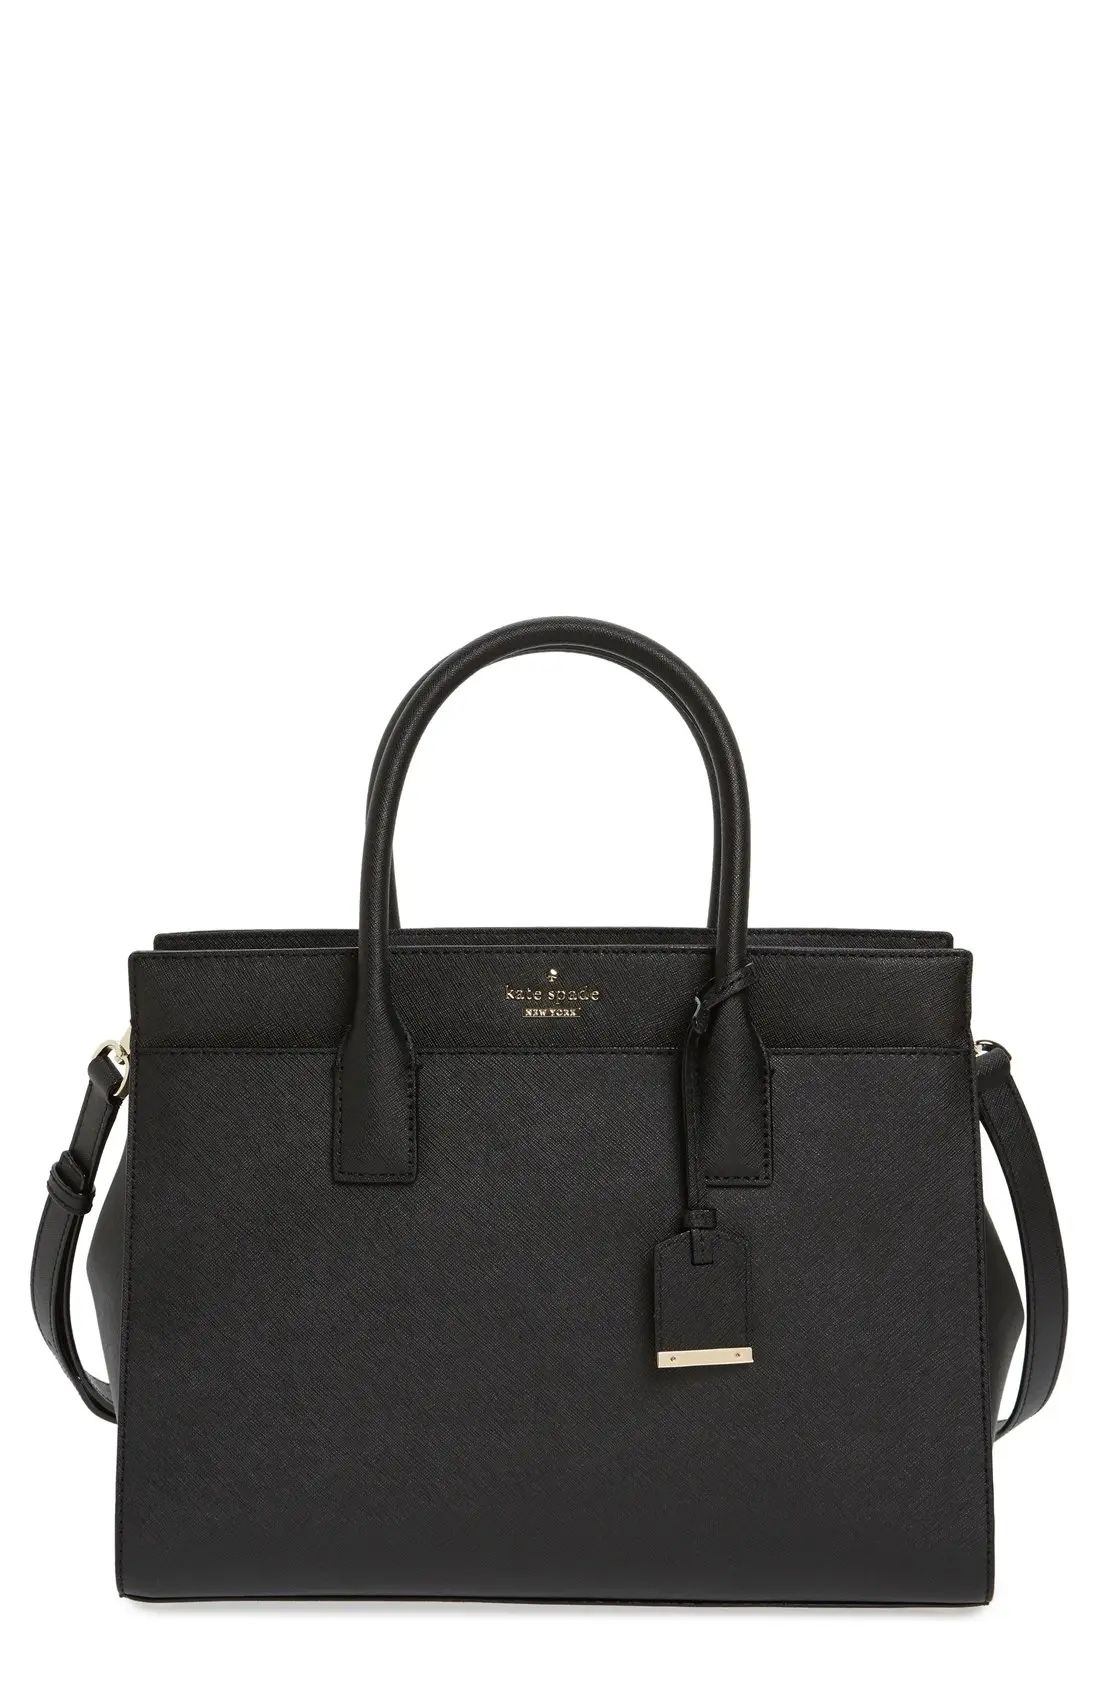 cameron street - candace leather satchel | Nordstrom